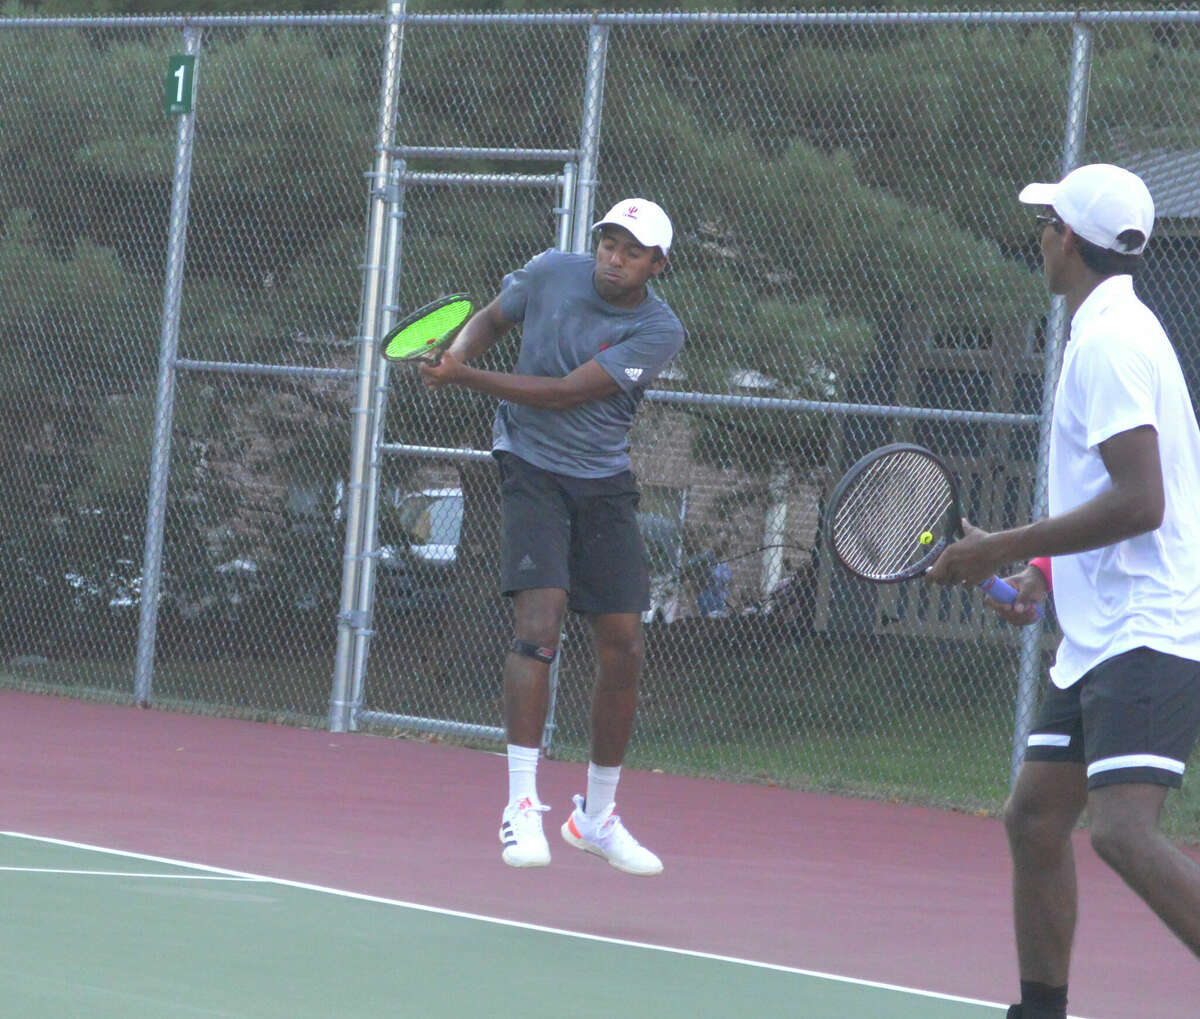 Nishanth Basavareddy returns a serve in the finals of the Doubles Shootout on Saturday at the EHS Tennis Center. 